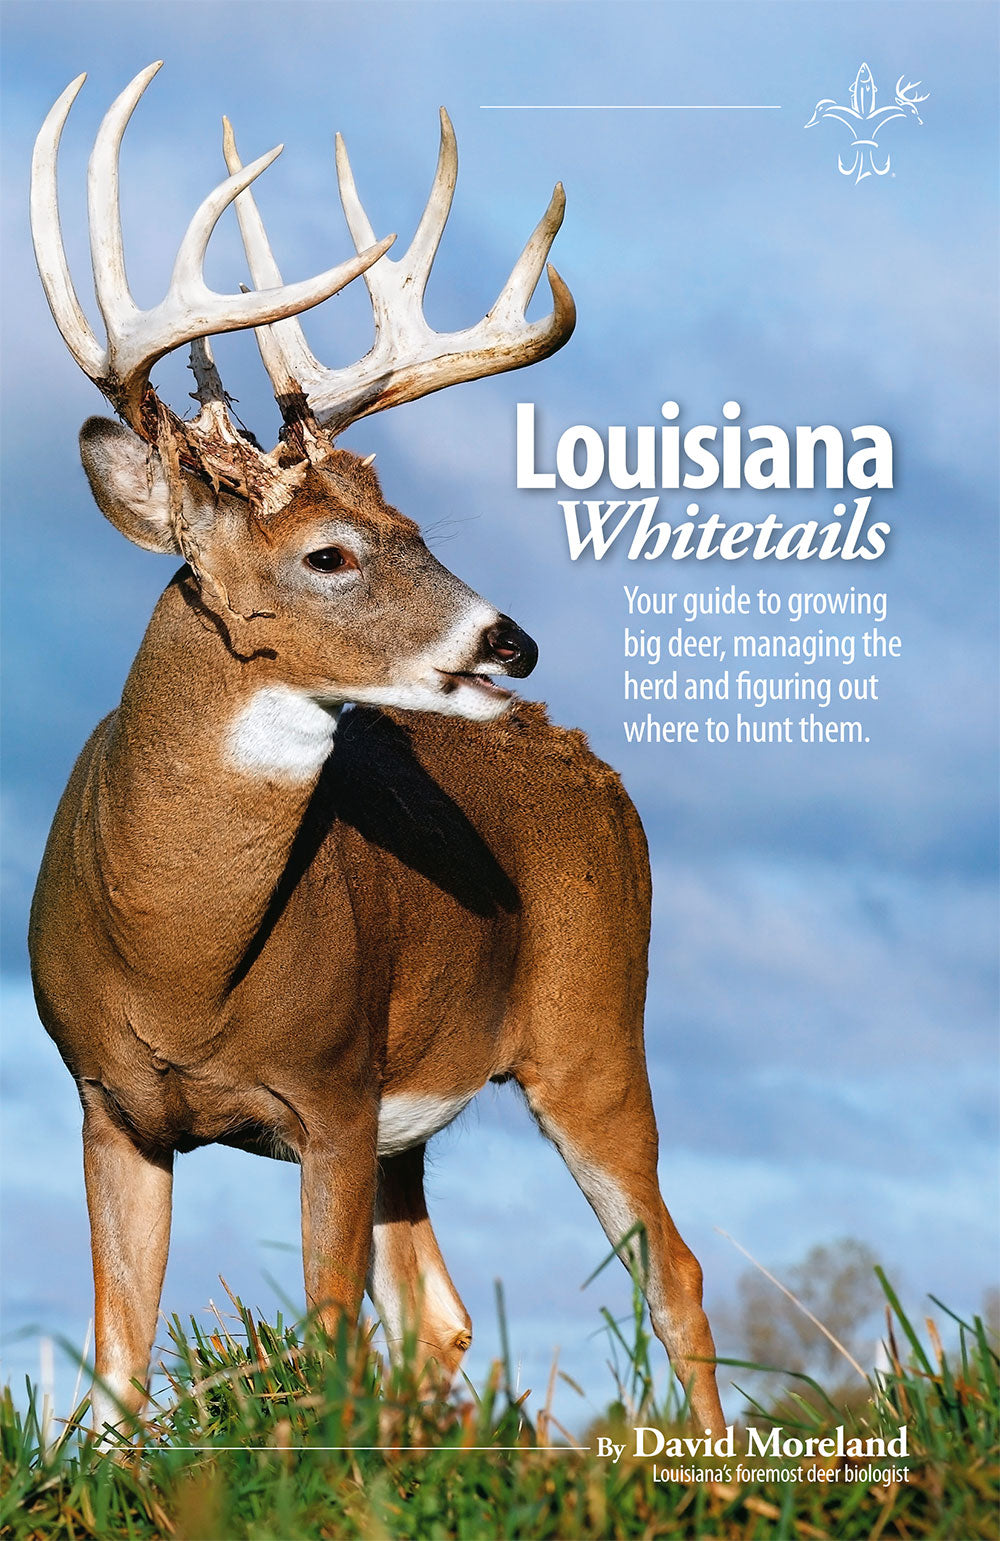 Louisiana Whitetails: Your guide to growing big deer, managing the herd and figuring out where to hunt them.